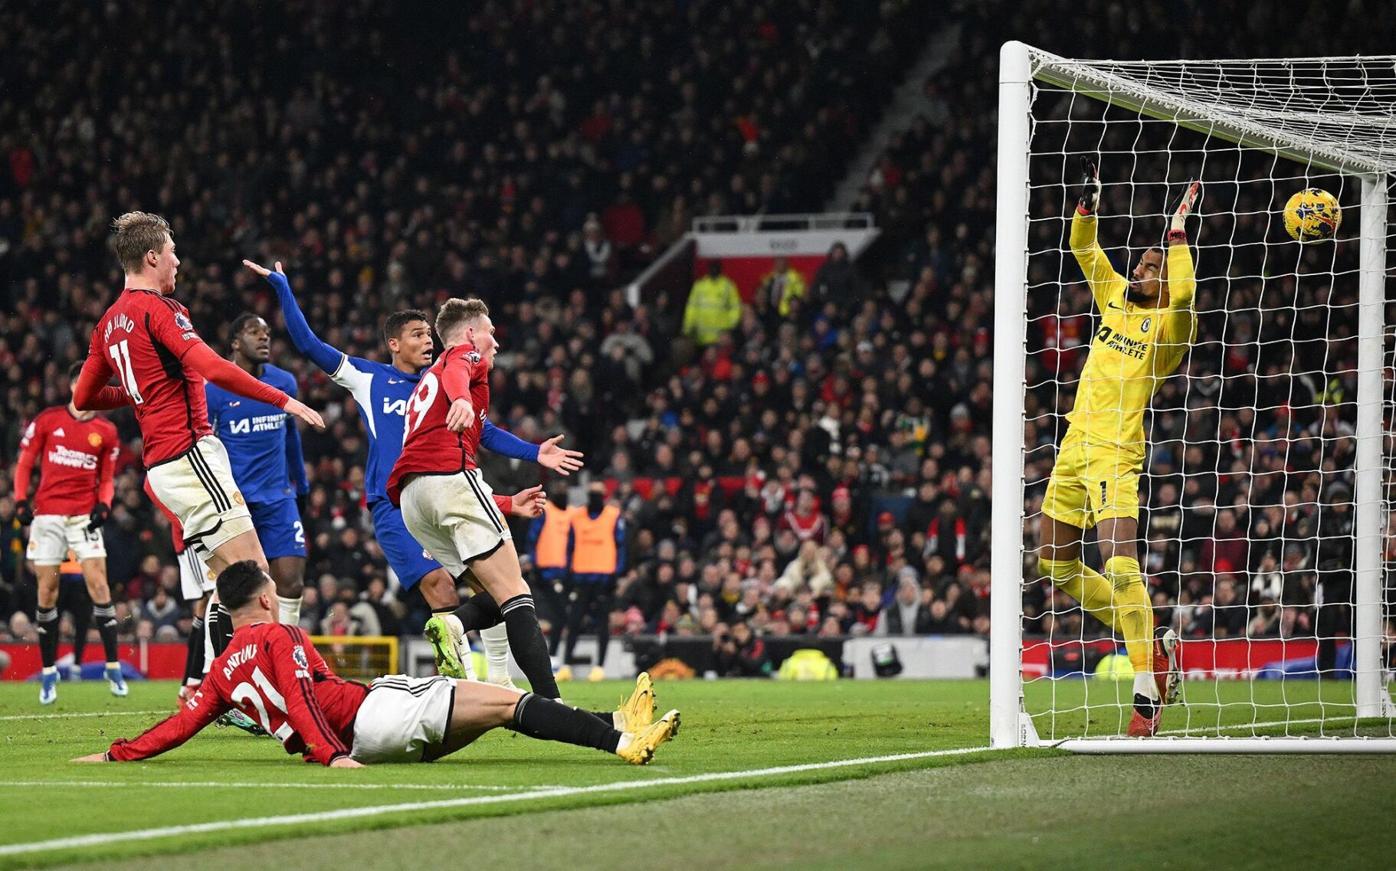 Manchester United's rollercoaster season continues after precious win  against Chelsea